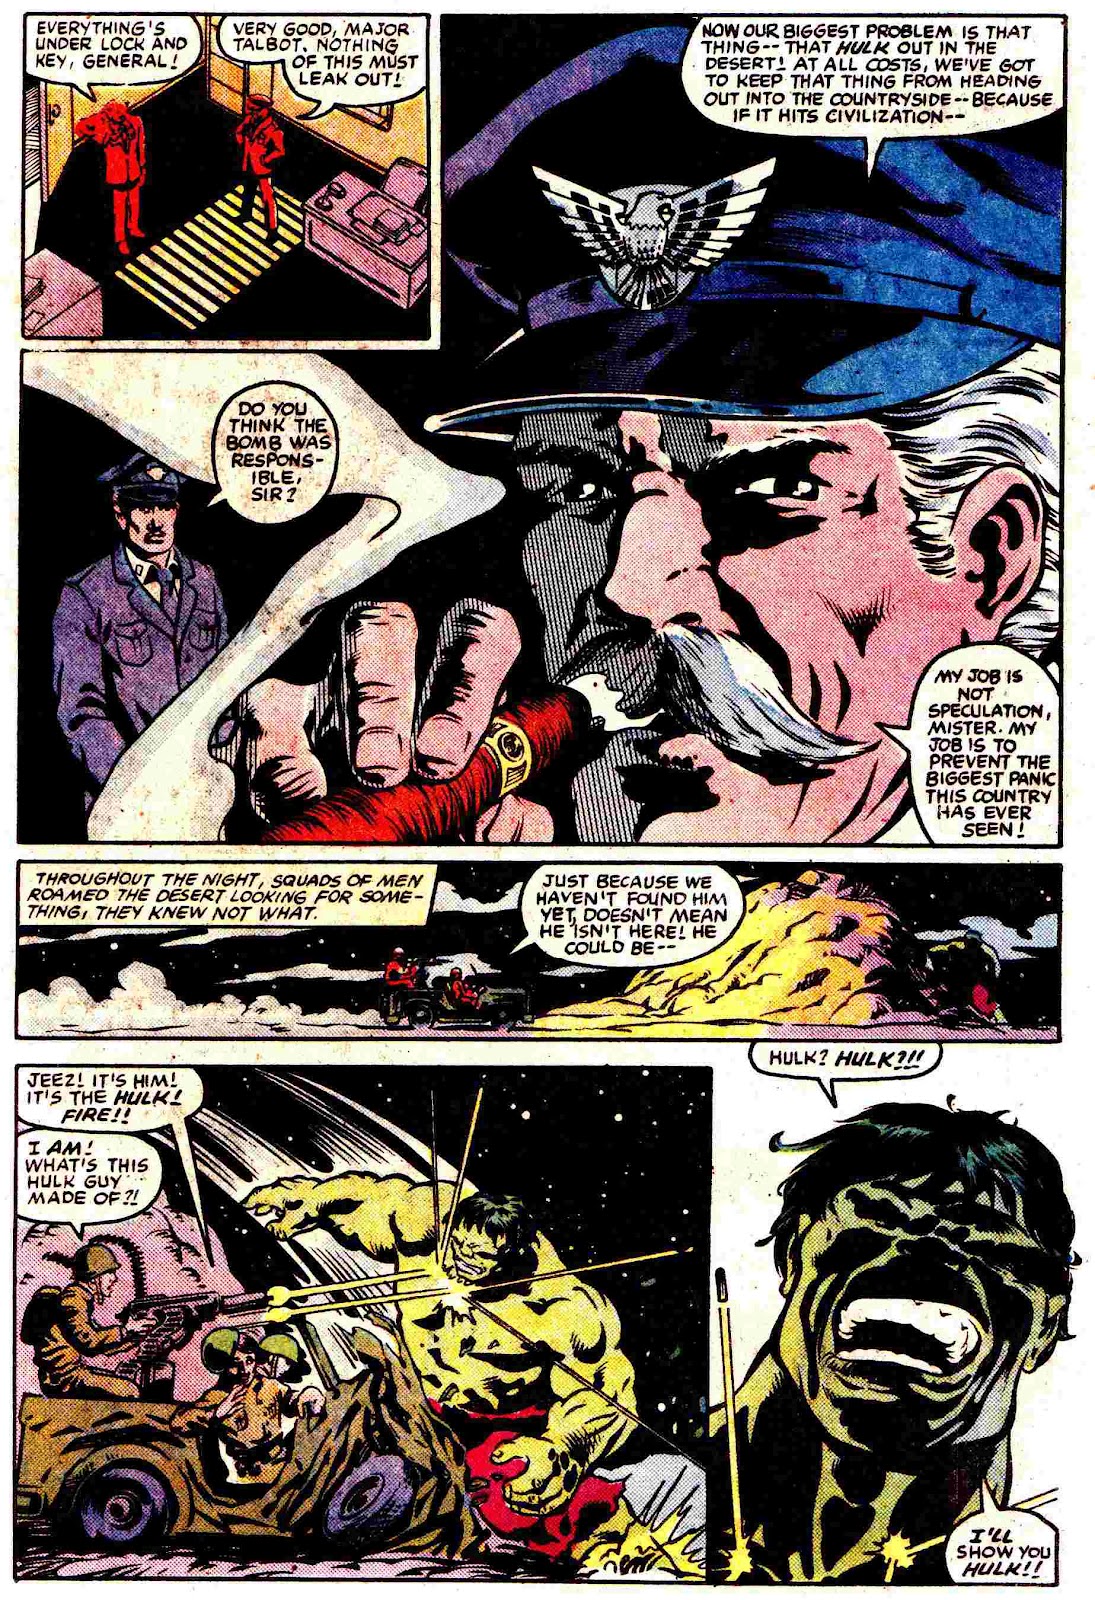 What If? (1977) issue 45 - The Hulk went Berserk - Page 10